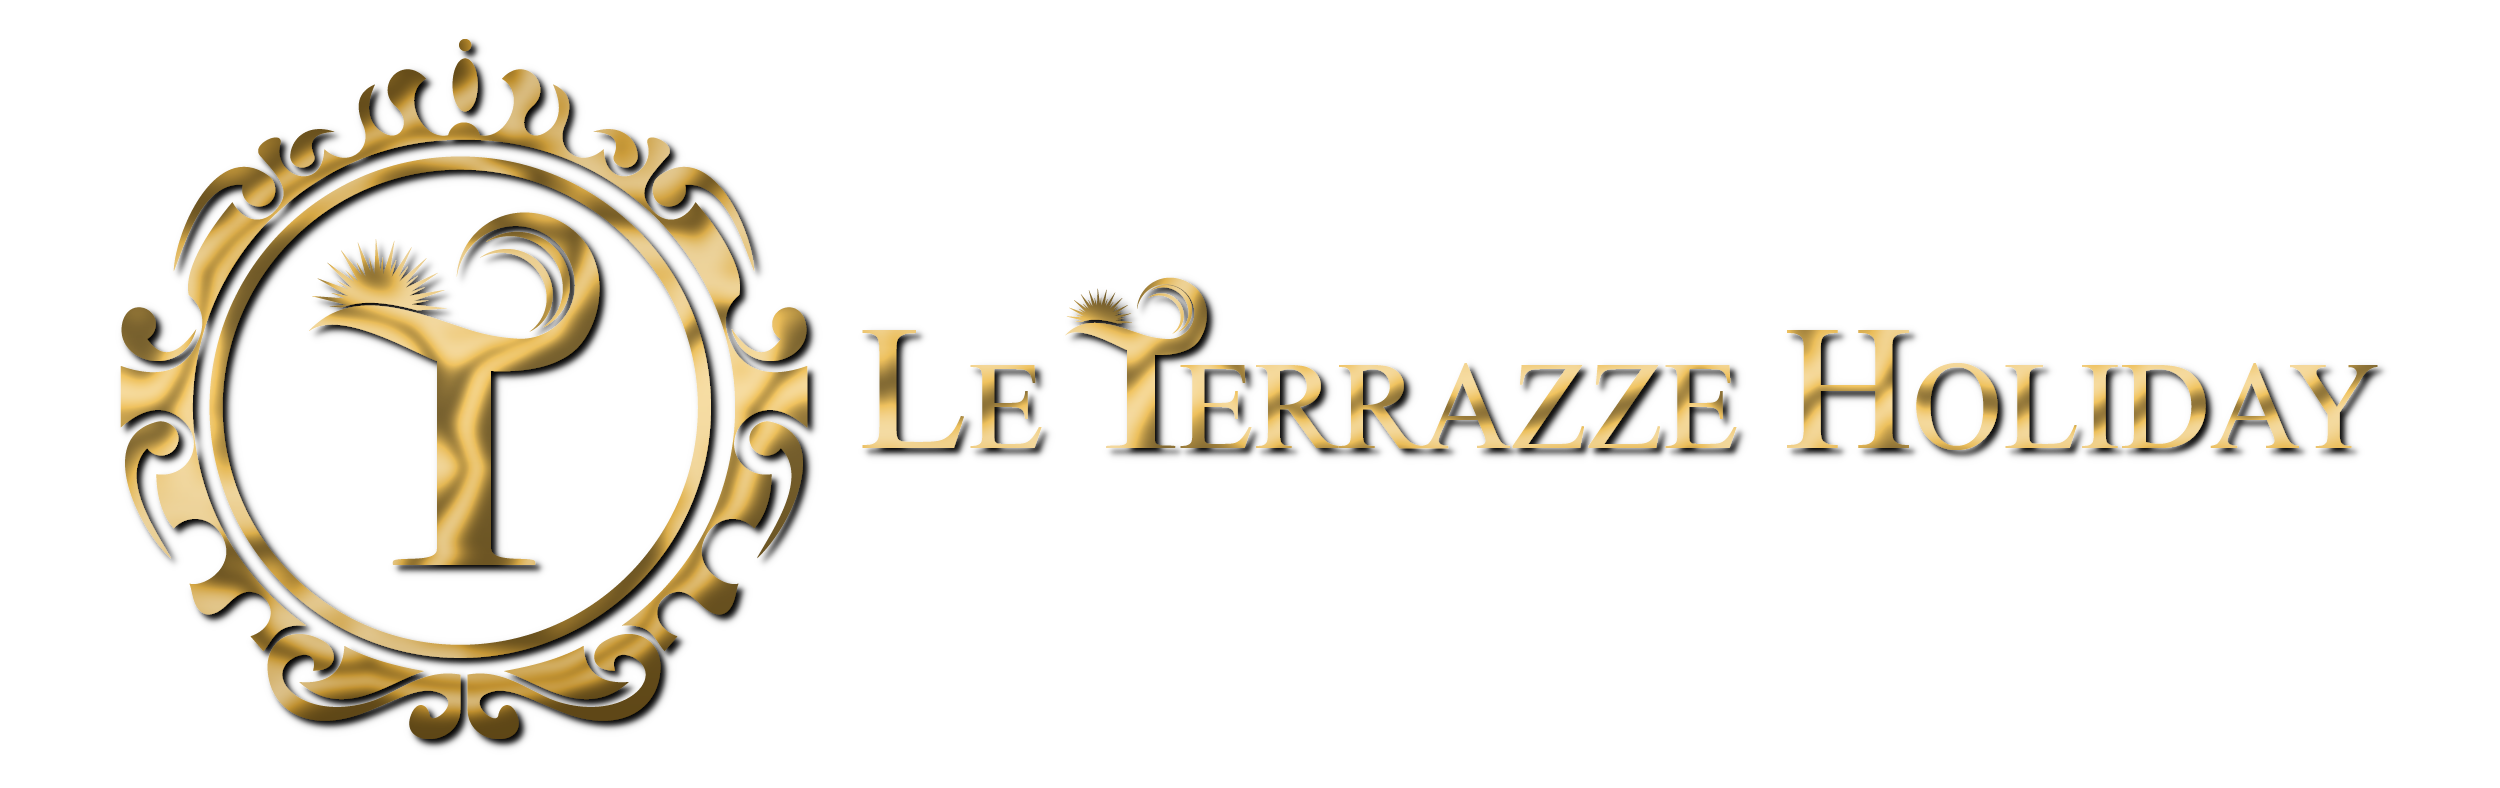 Le Terrazze Holiday